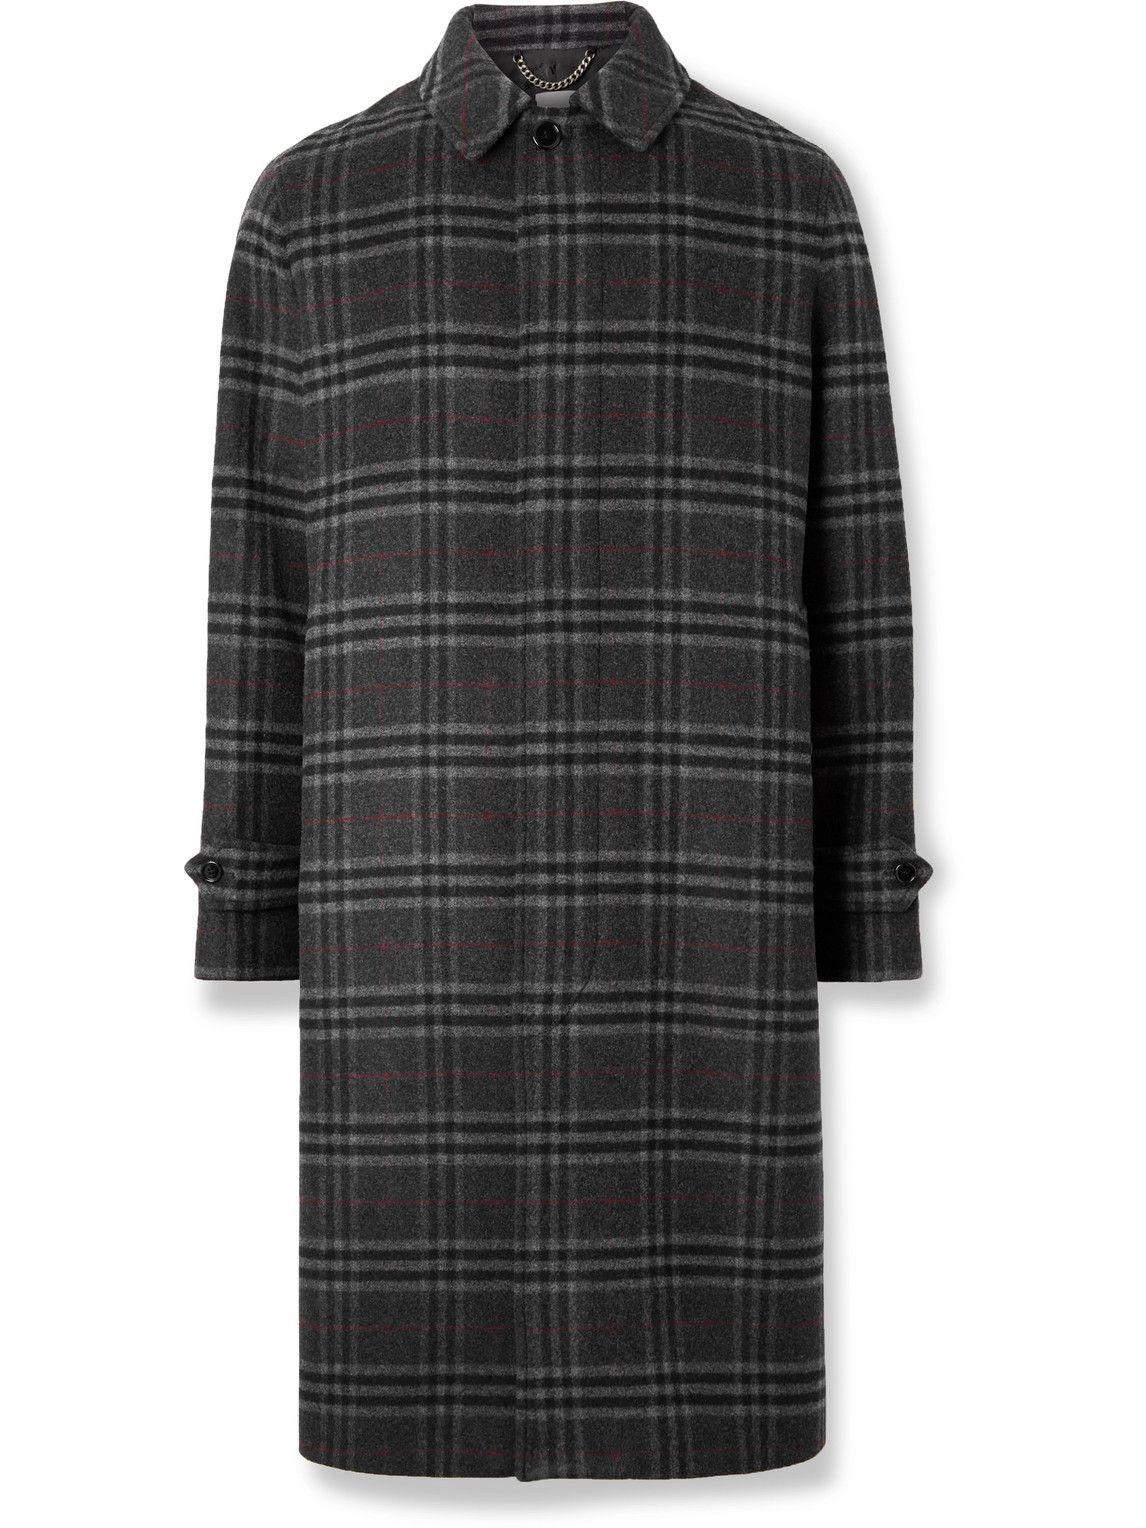 Burberry - Checked Wool and Cashmere-Blend Coat - Gray Burberry